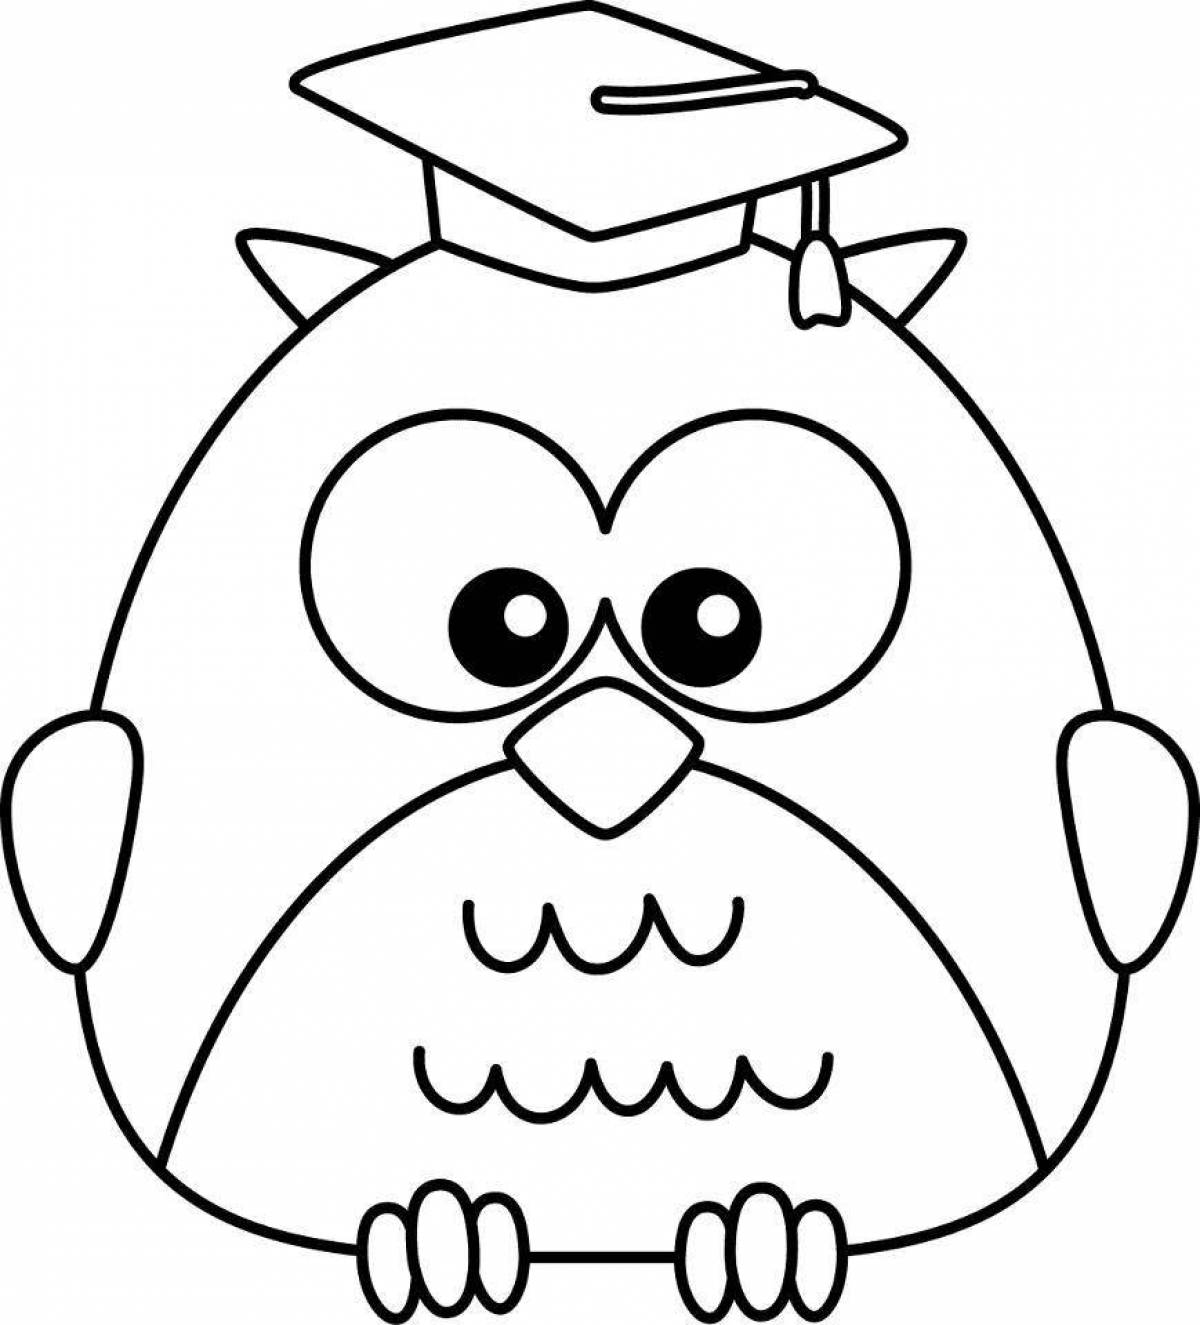 Coloring owlet